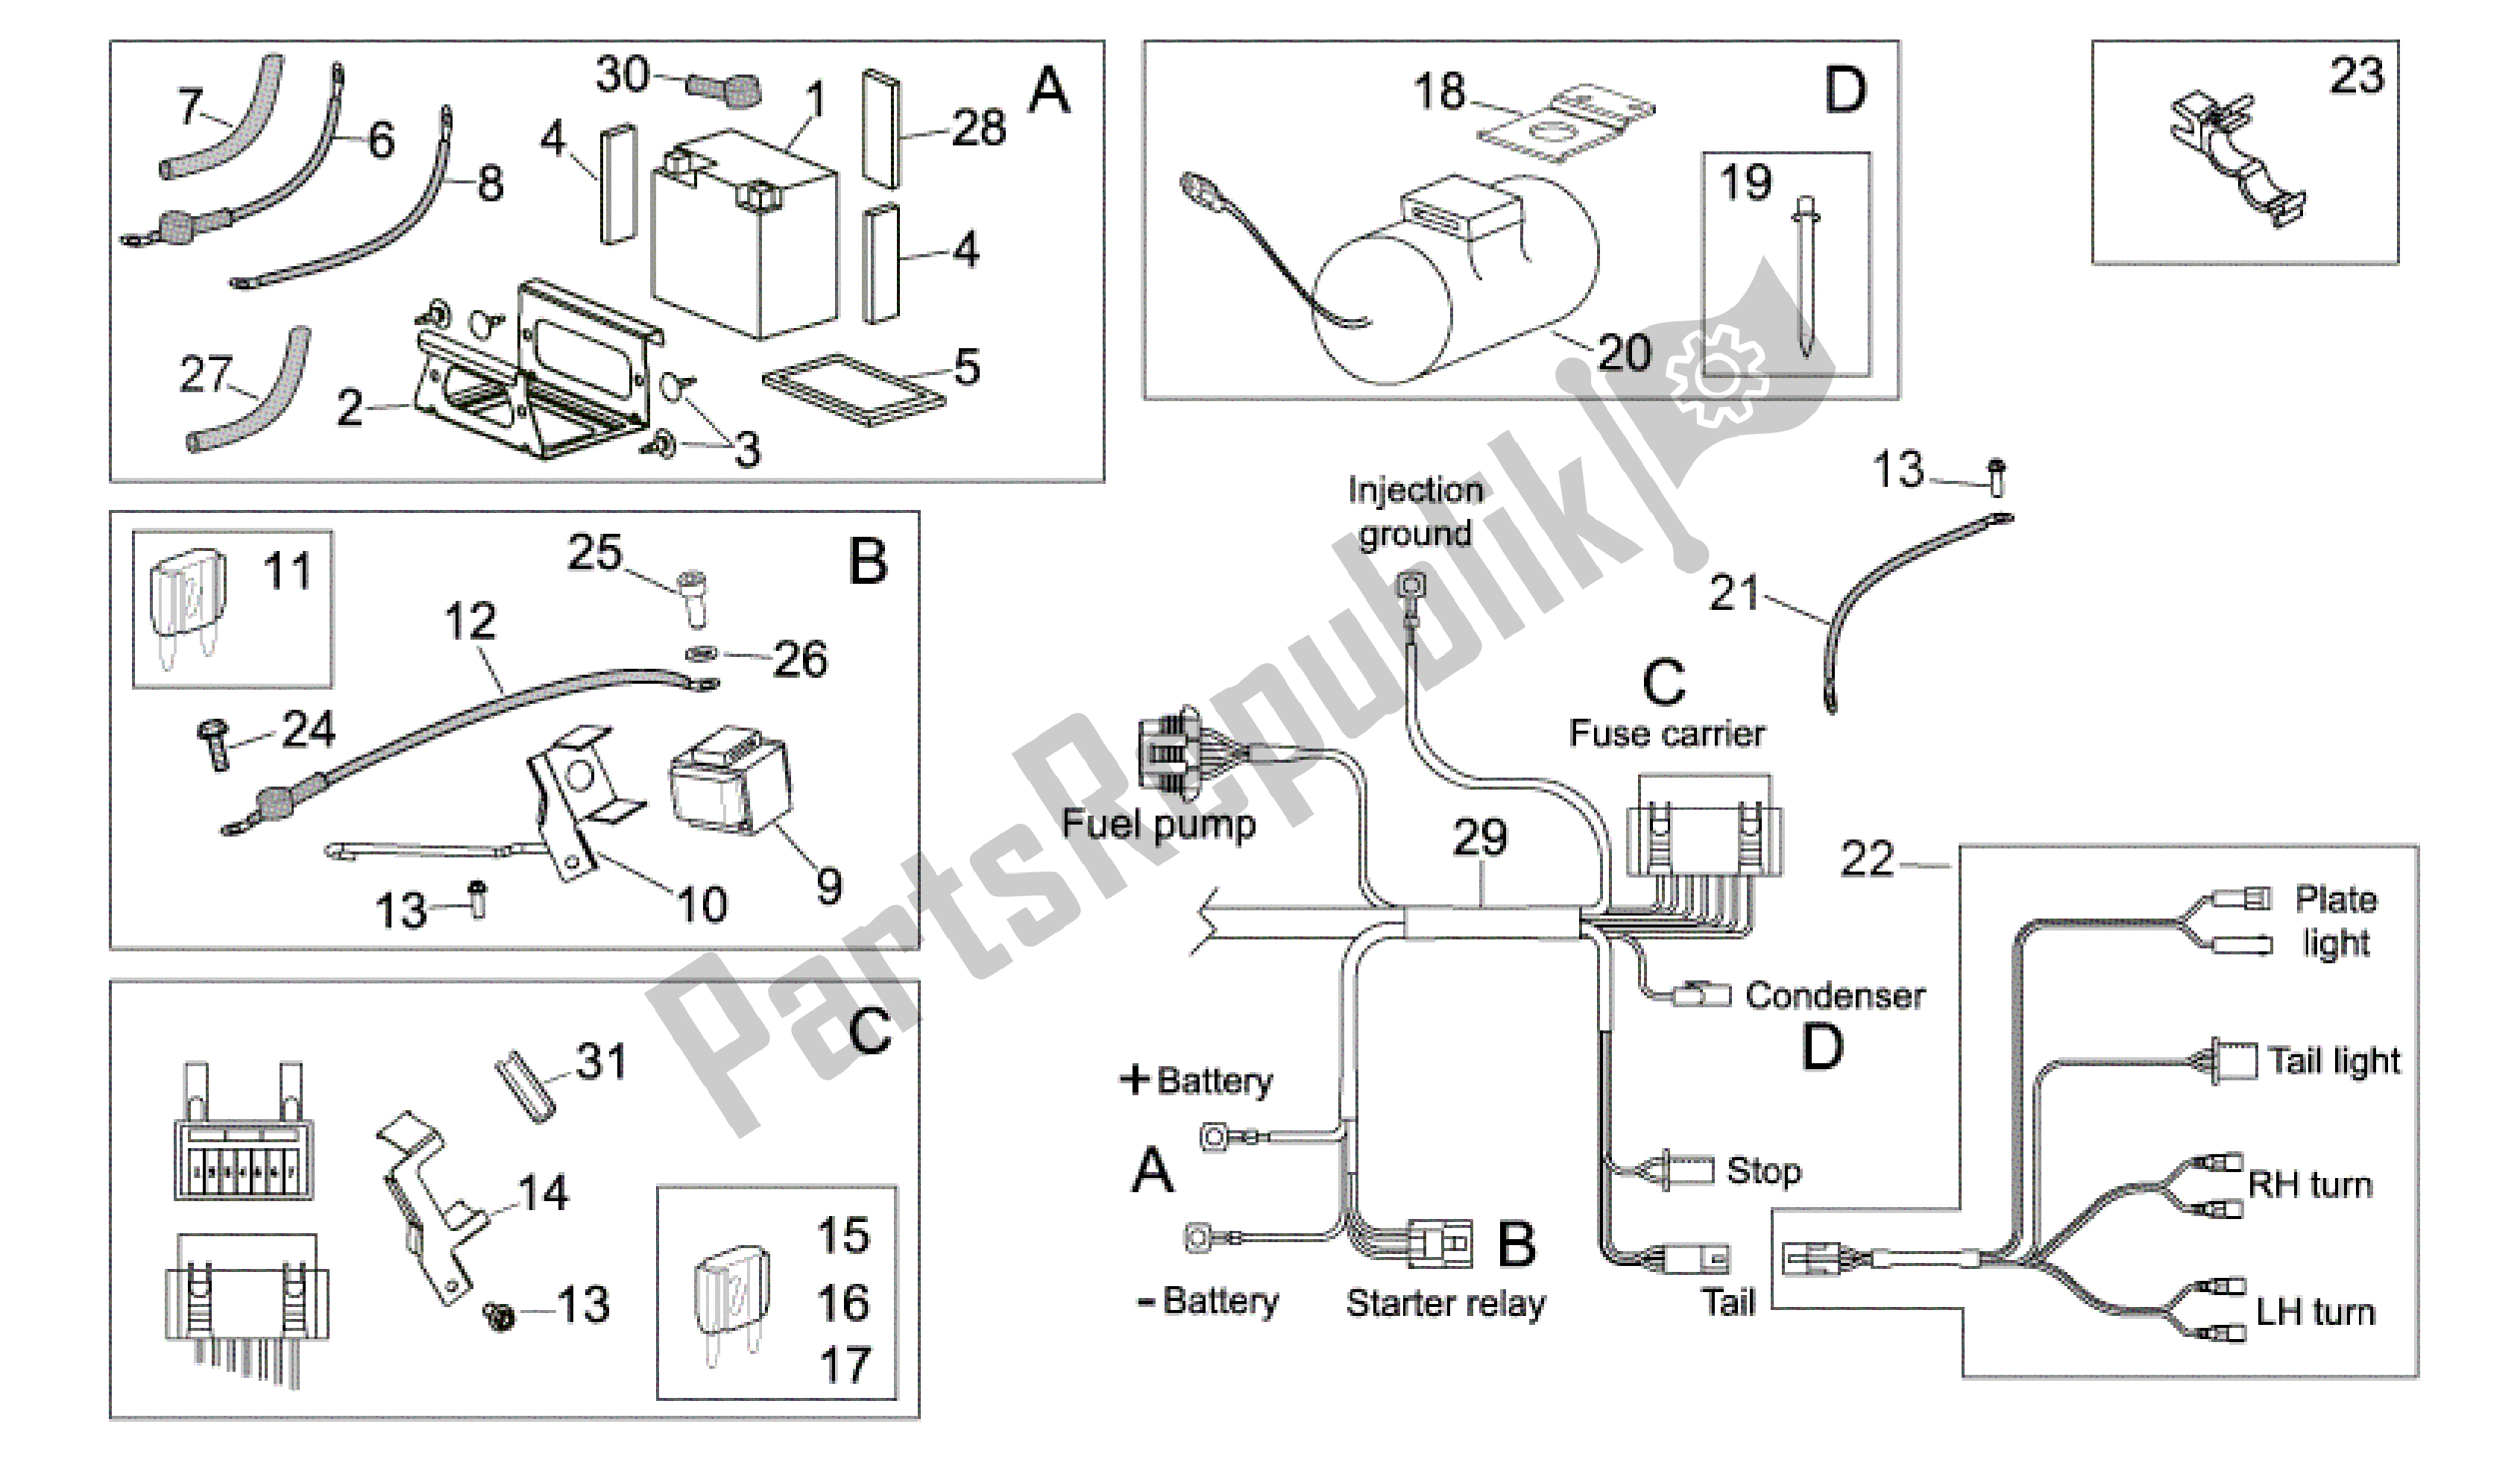 All parts for the Electrical System Ii of the Aprilia SXV 450 2009 - 2011